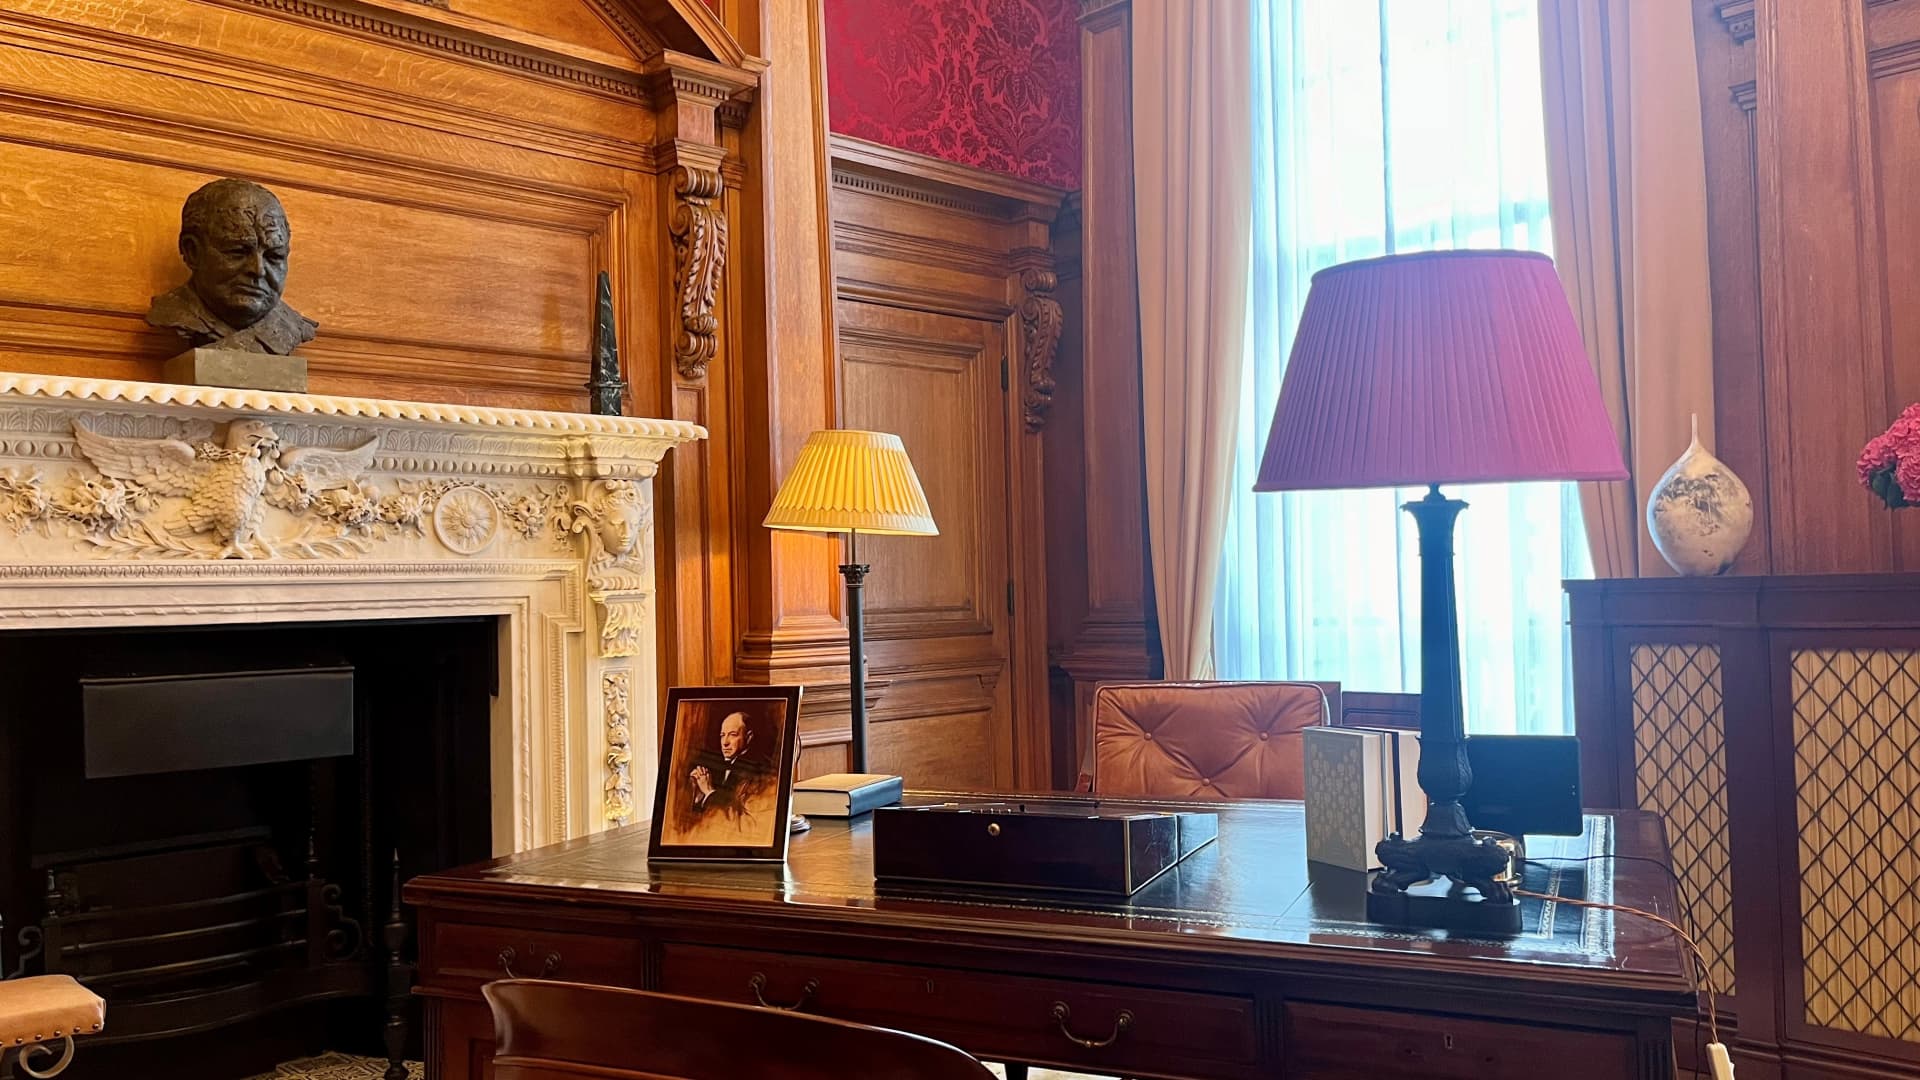 The Old War Office was occupied by various political and military leaders, including wartime Prime Minister Winston Churchill. A replica of his desk and a bust is displayed in the Churchill Suite.